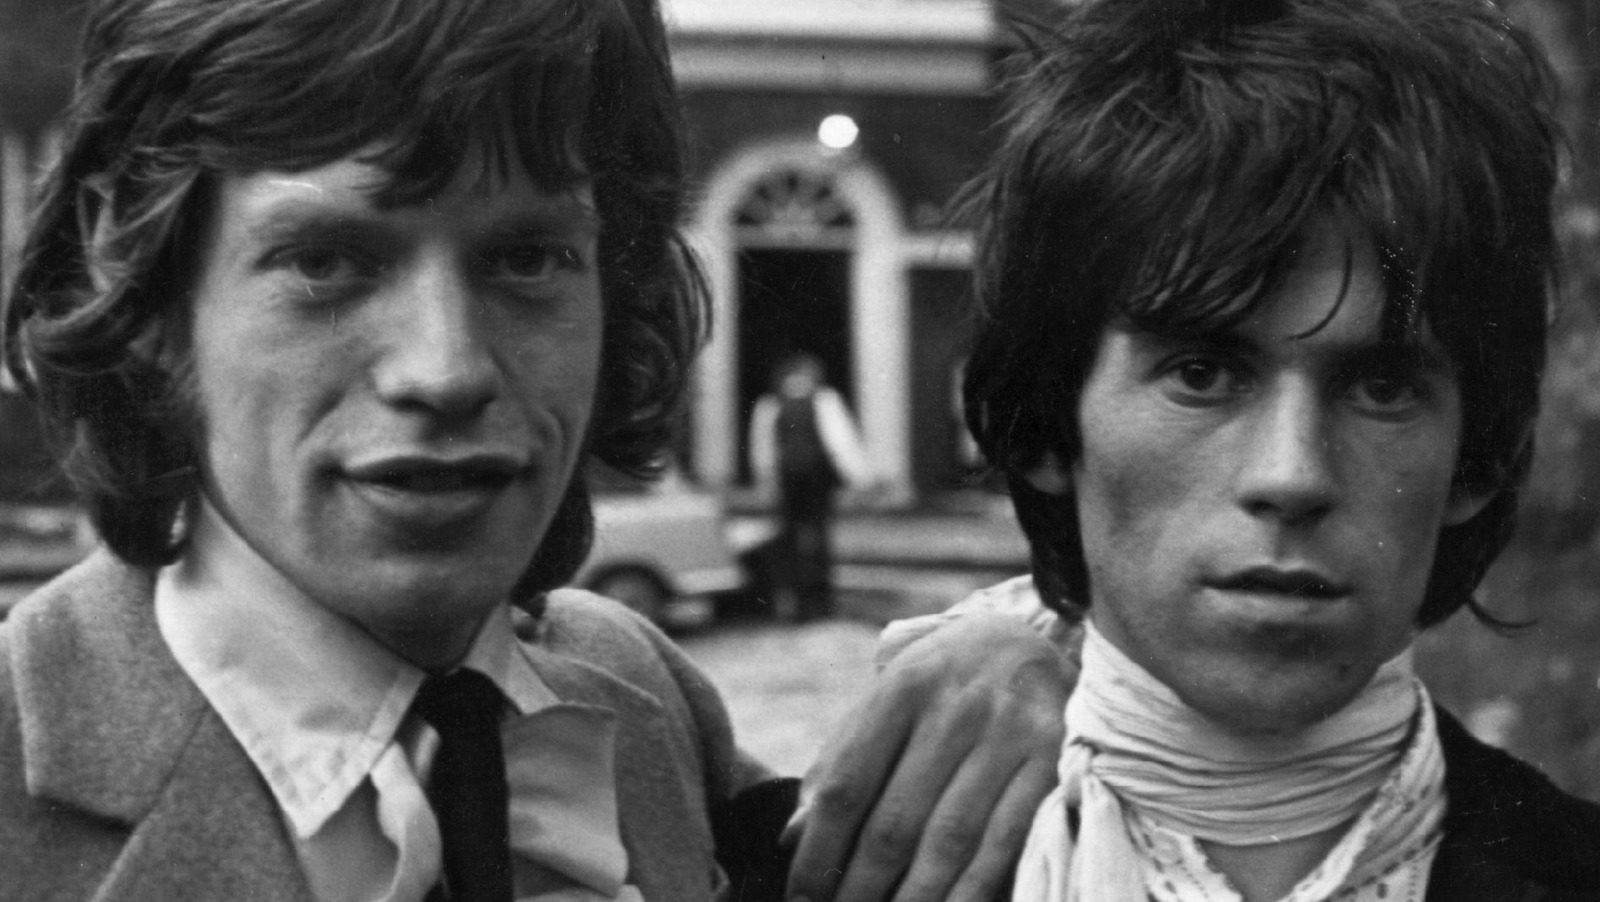 The Truth About Mick Jagger's Relationship With Keith Richards